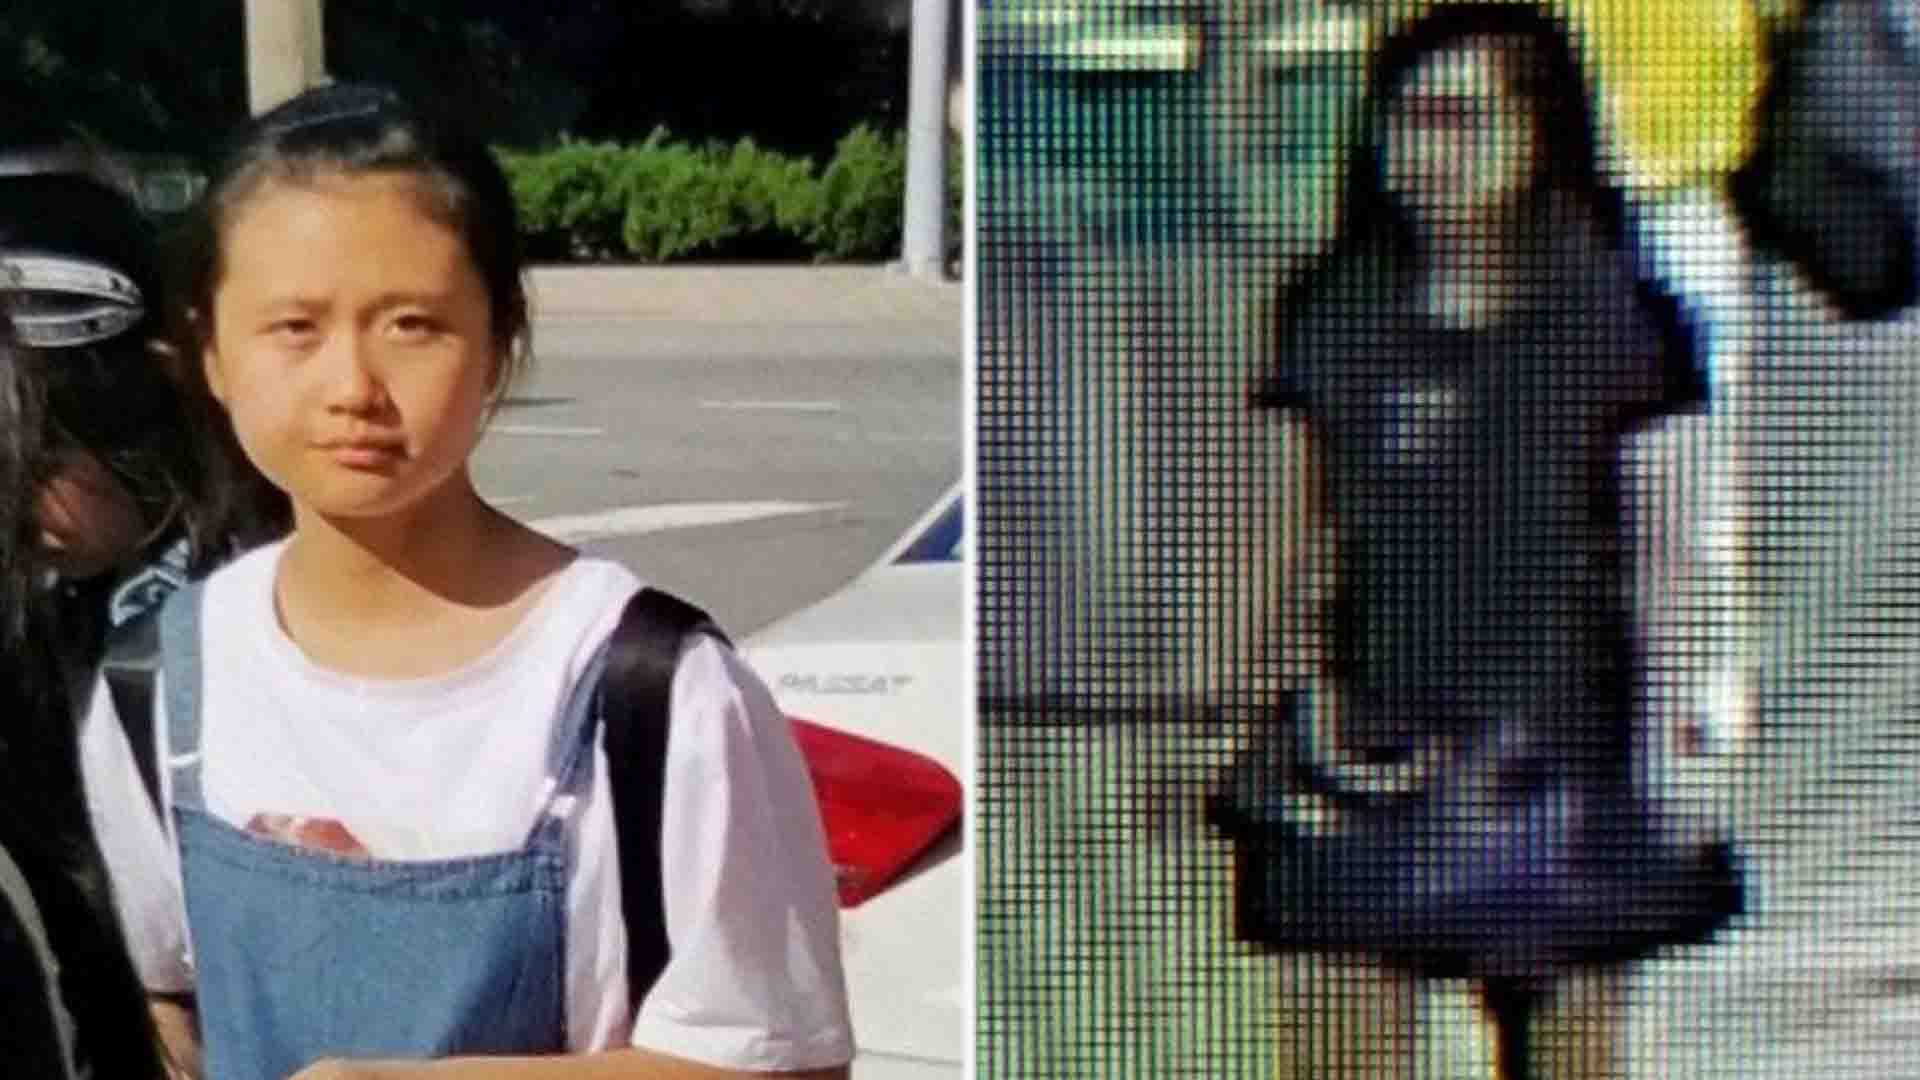 12 year old asian girl abducted.from raegan airport